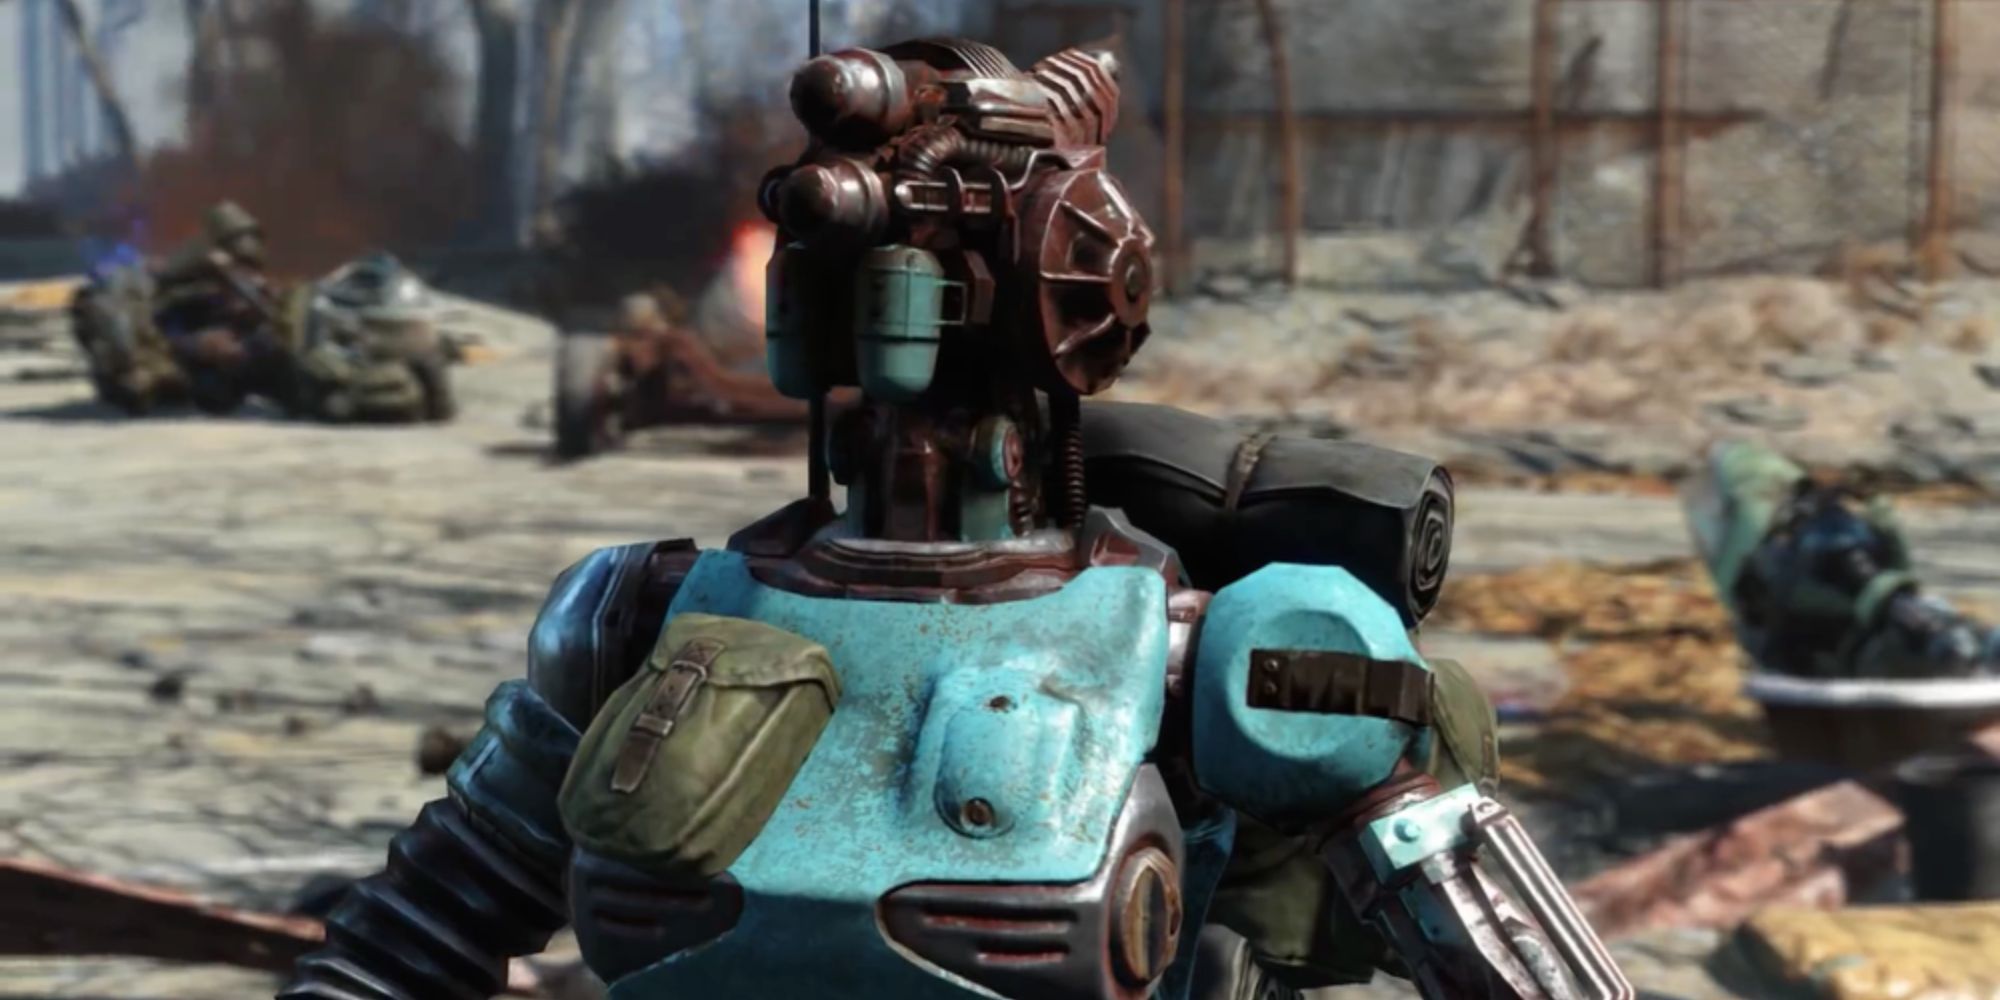 Fallout 4 Ada As A Companion From The Automatron DLC